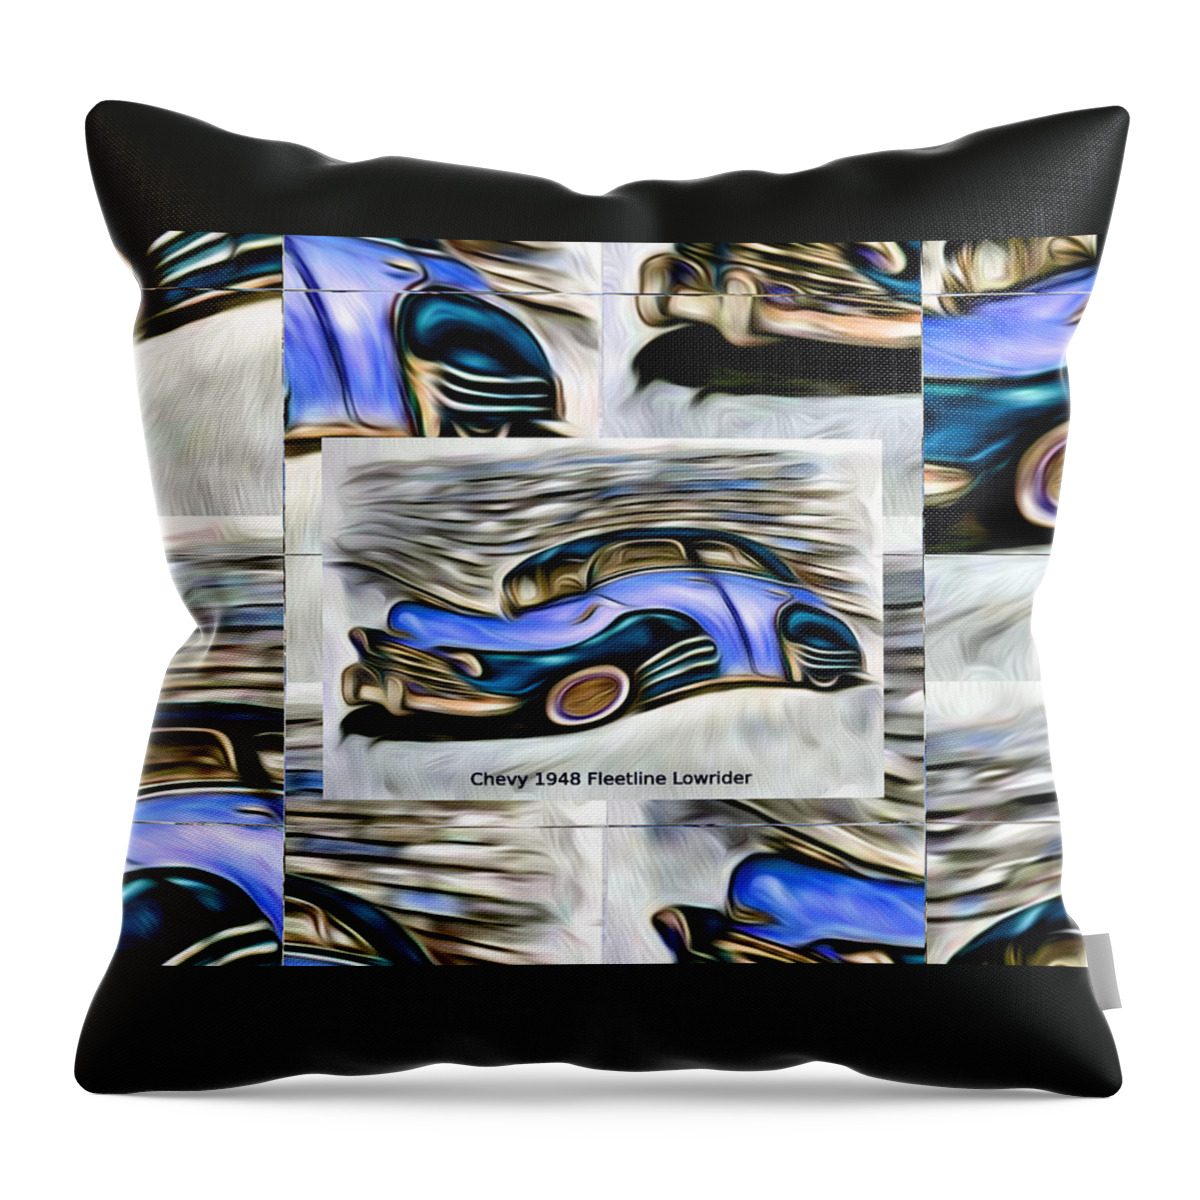 Chevy Throw Pillow featuring the digital art Blue Car Abstract Collage Art Poster by Ronald Mills